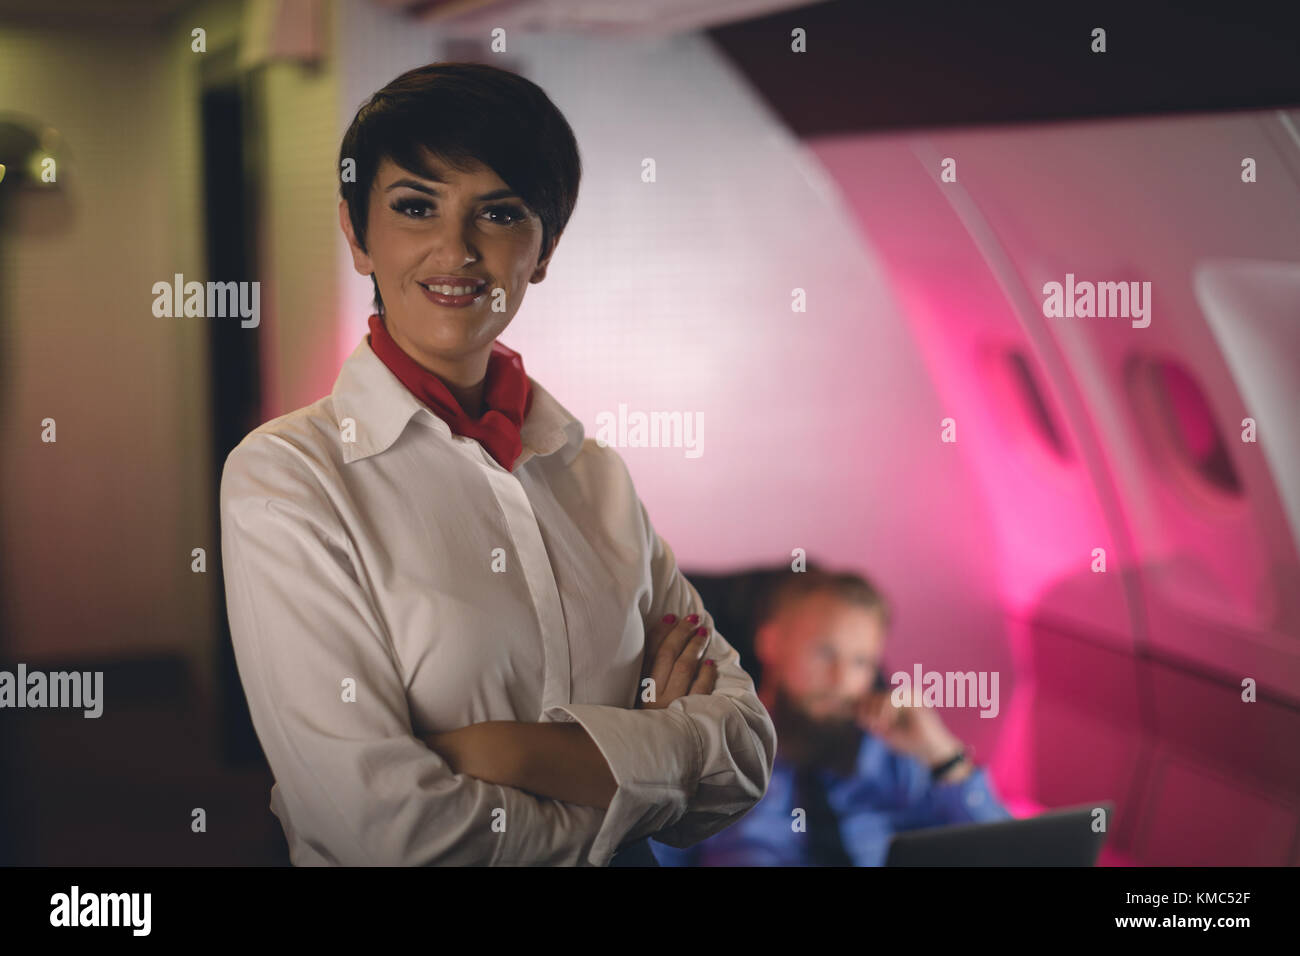 Air hostess standing with arms crossed Stock Photo